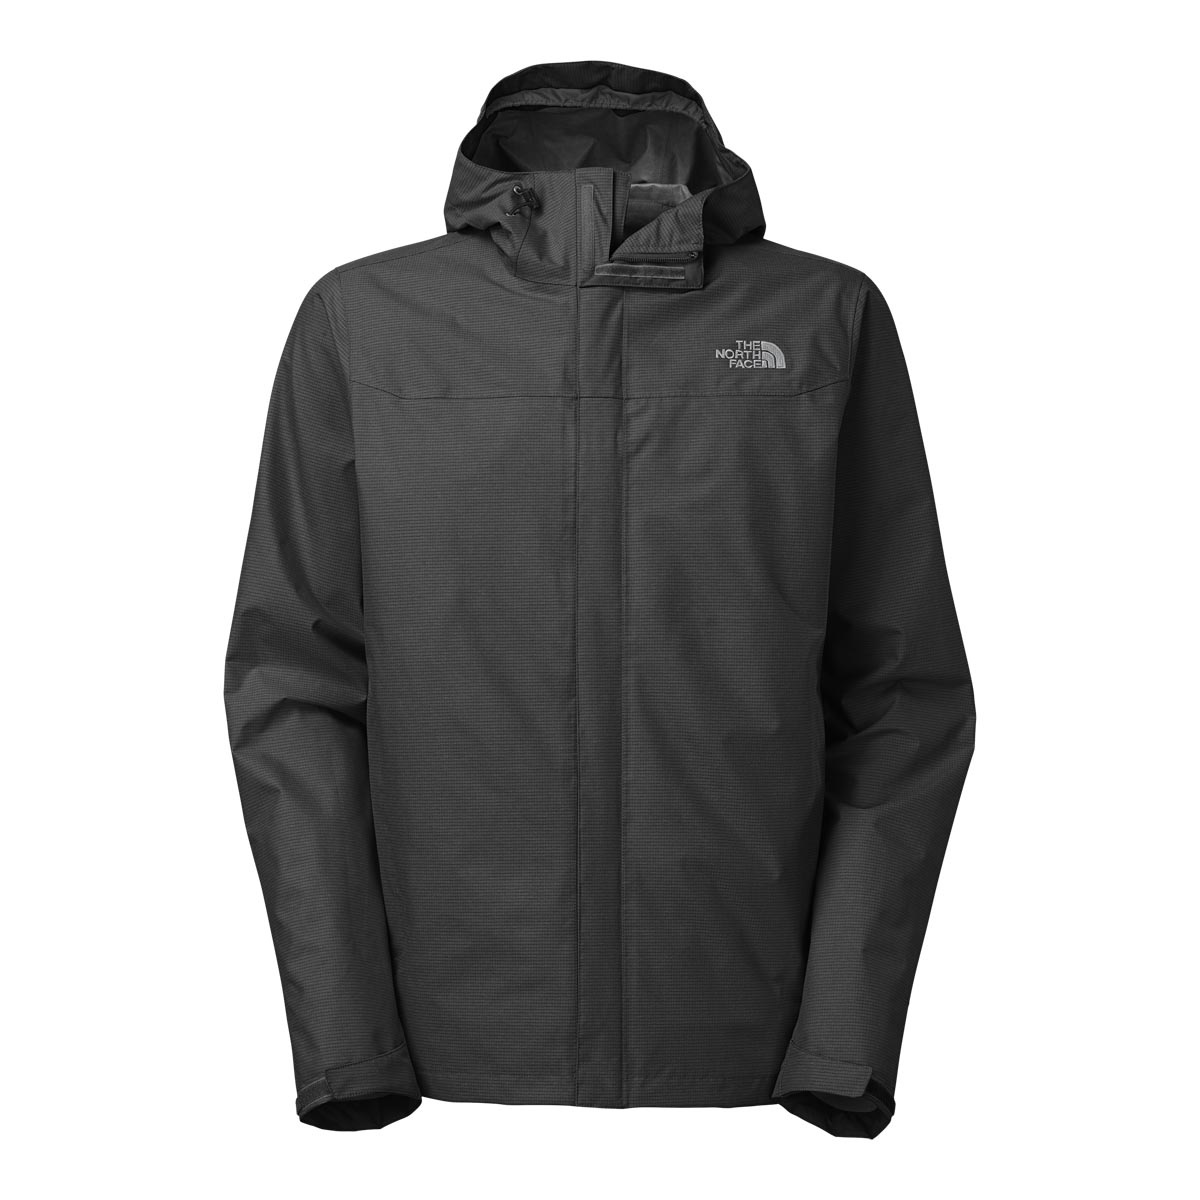 The North Face Mens Venture Jacket Tall Sizes